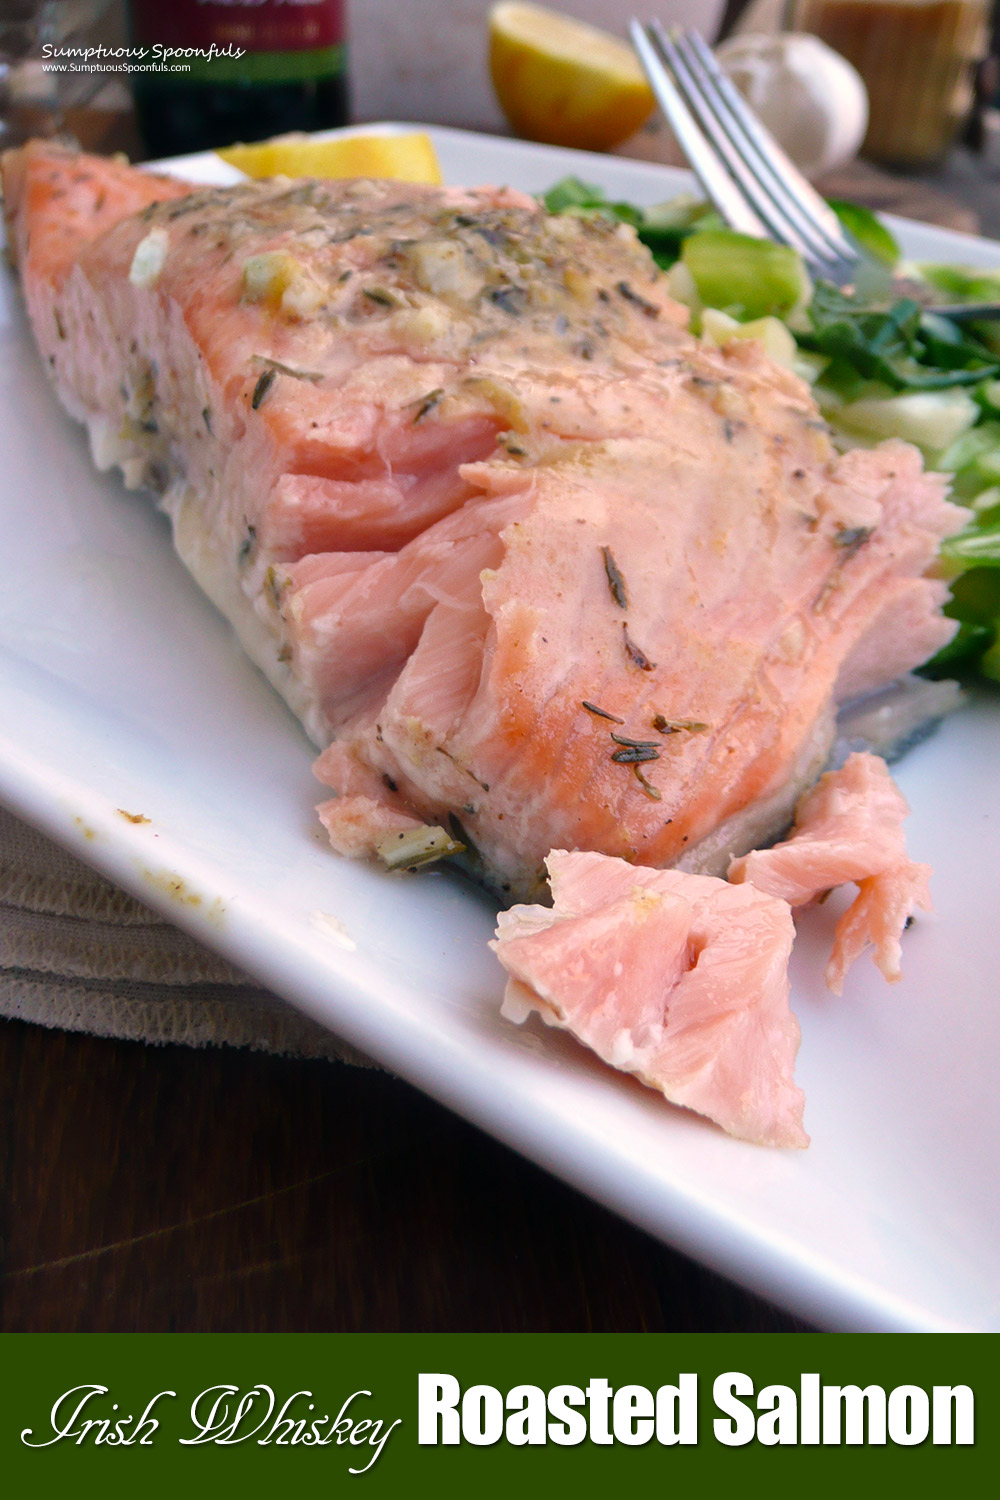 Irish Whiskey Roasted Salmon ~ When you marinate your salmon in Irish whiskey with a bit of lemon zest, honey, garlic and thyme, the salmon takes on a marvelous flavor and texture and has a beautiful glazed look at the finish.